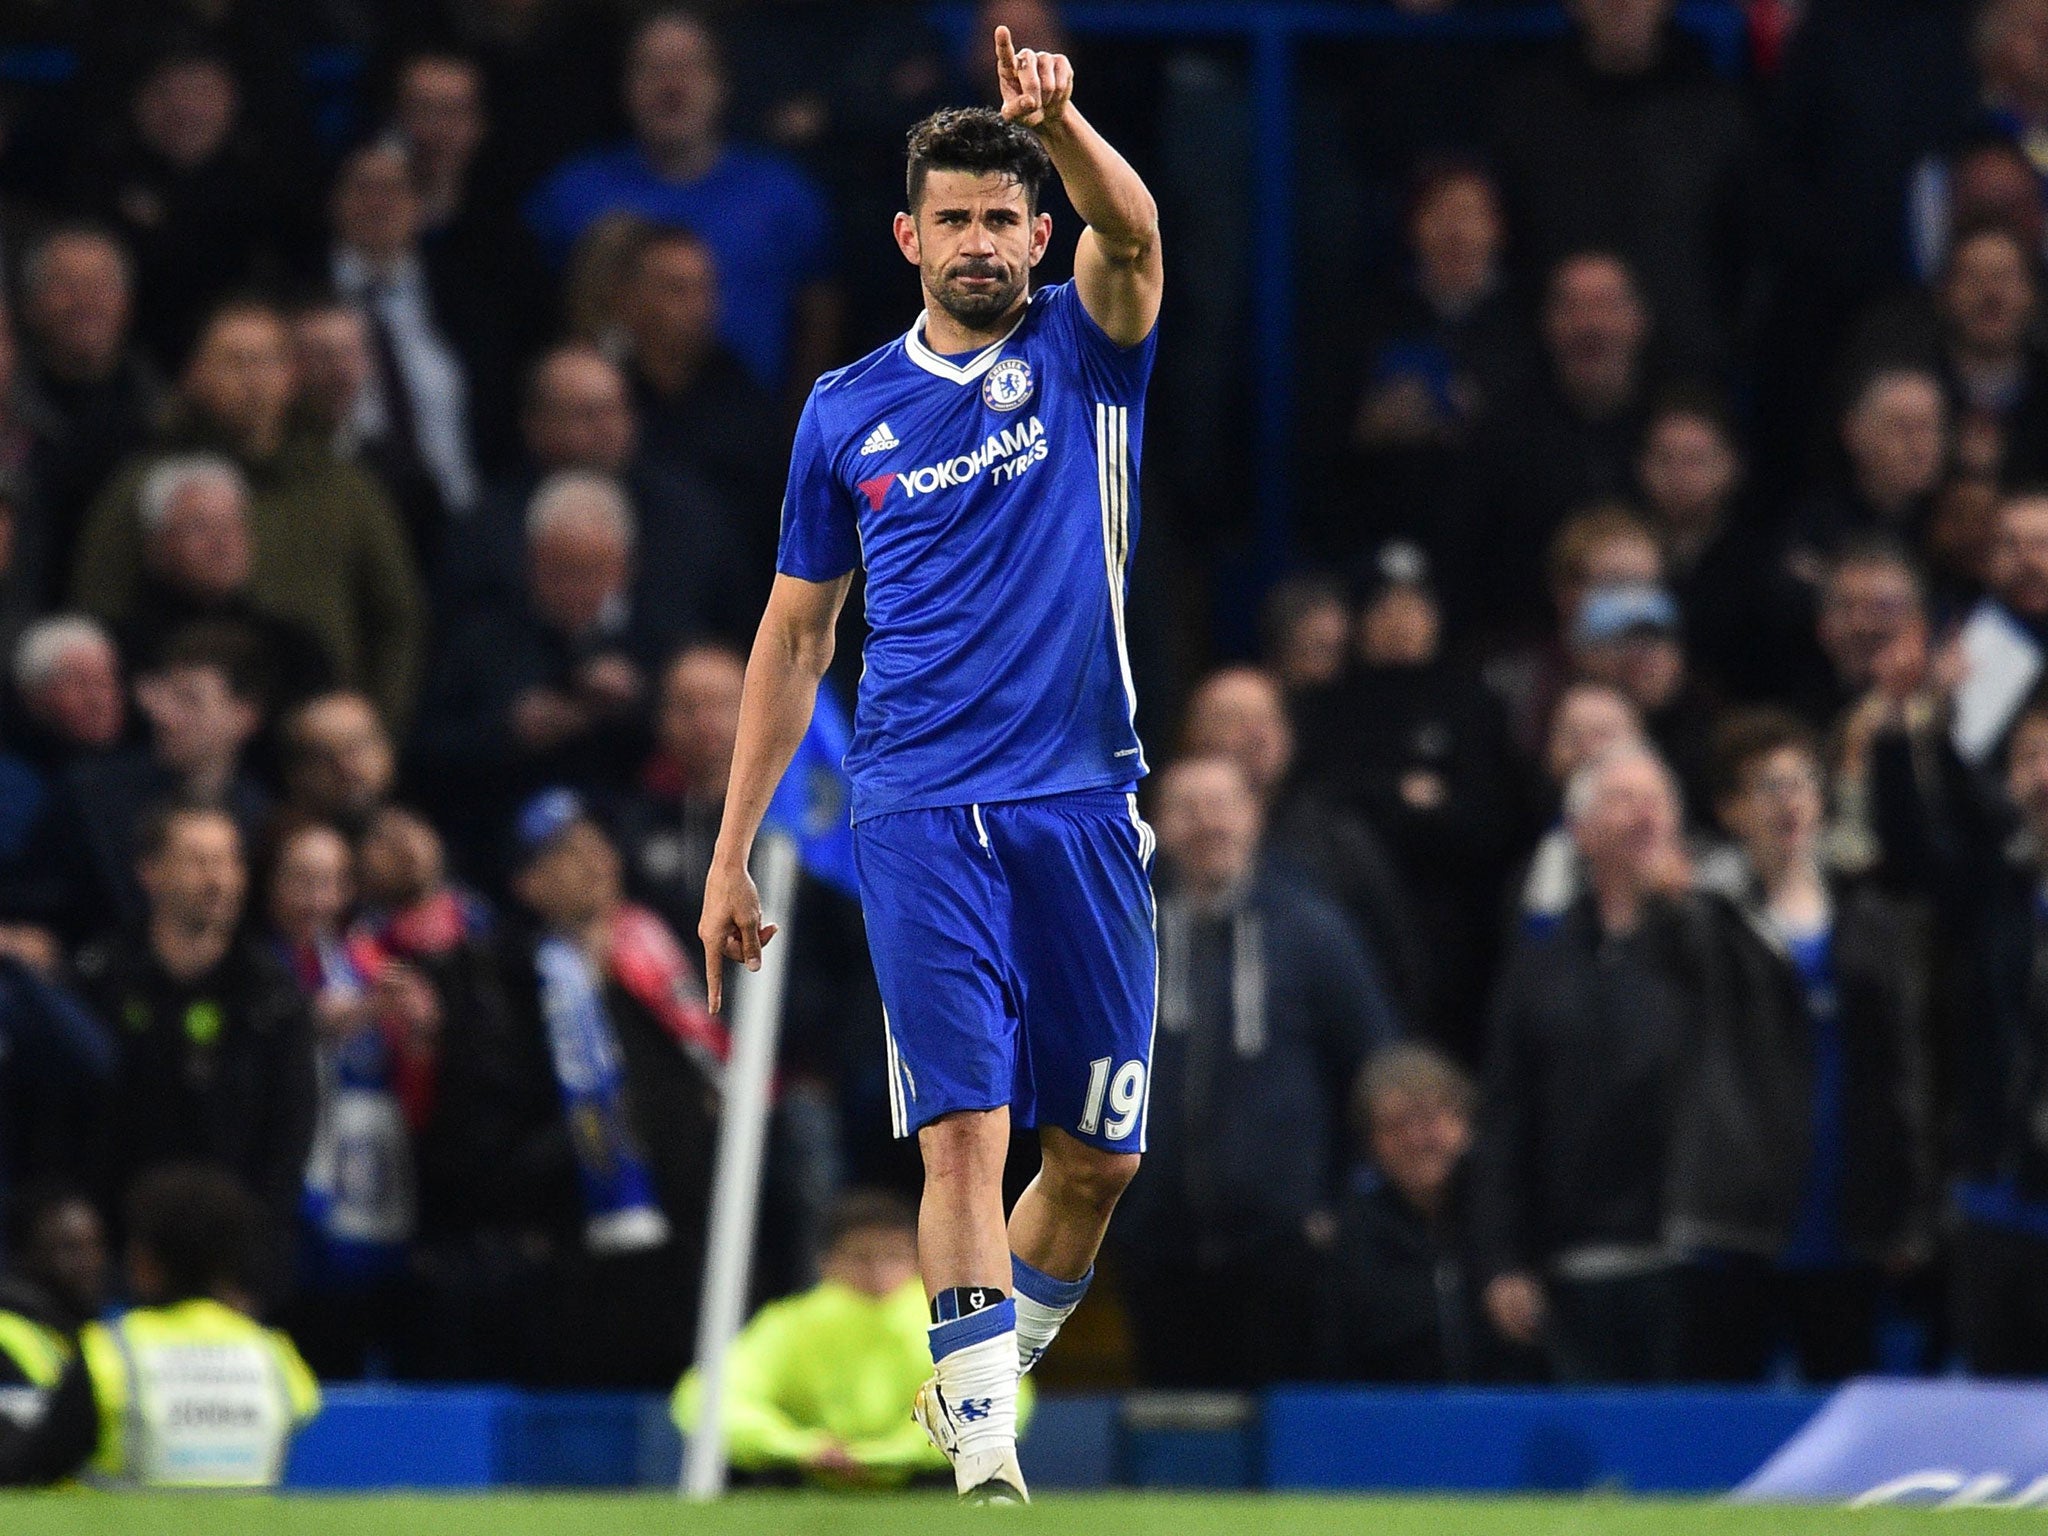 Diego Costa has repeatedly been linked with a move to the Chinese Super League